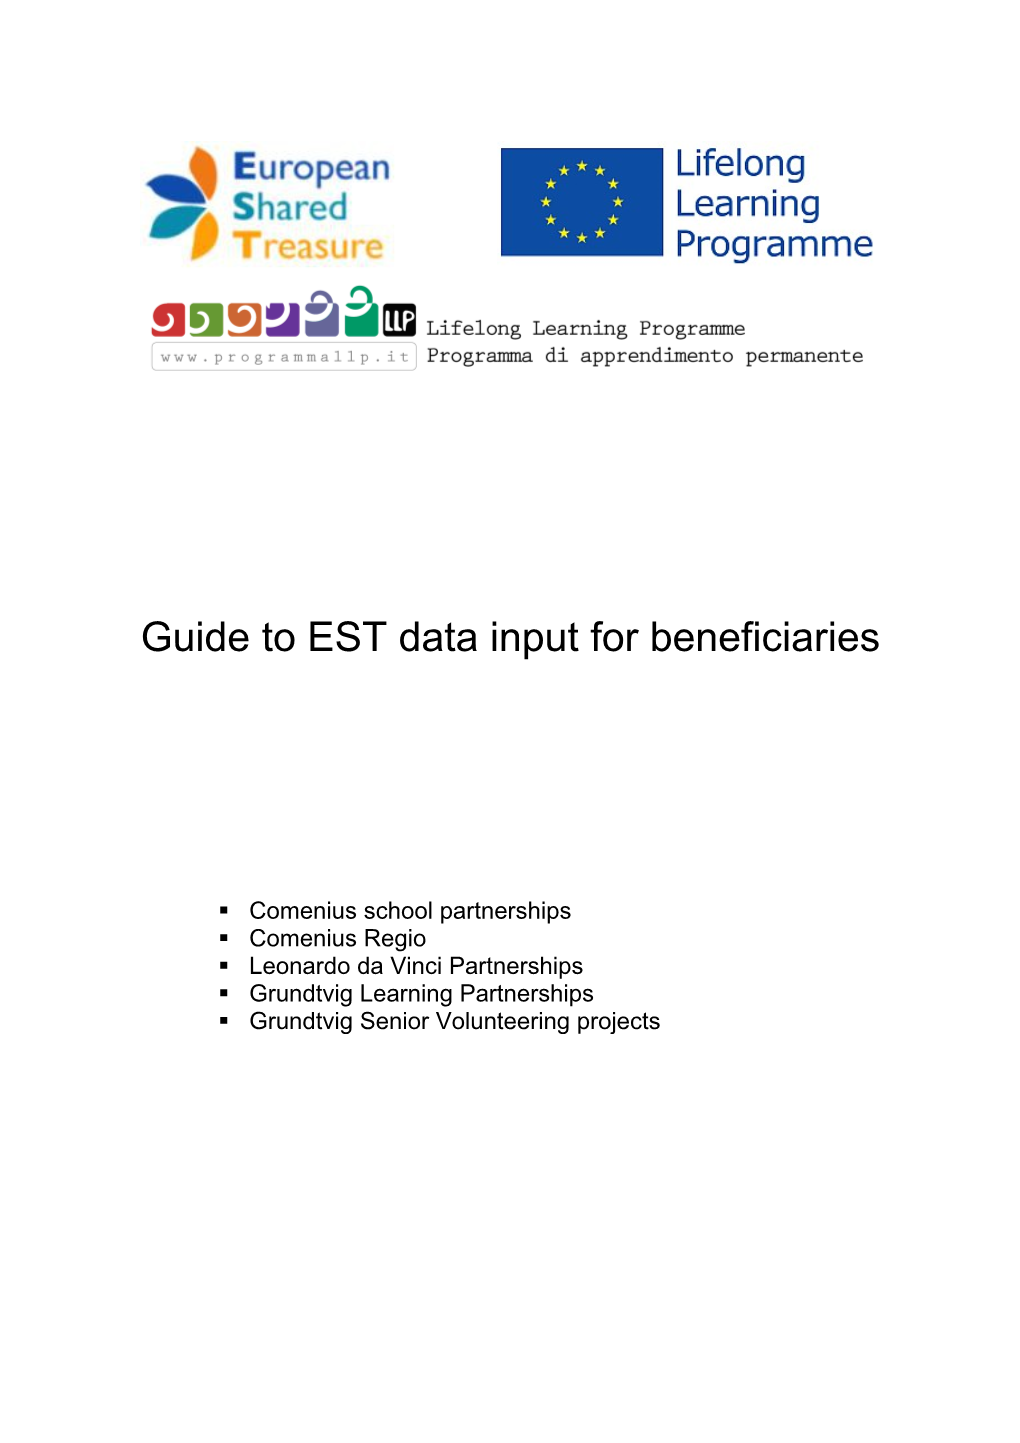 Guide to EST Data Inputfor Beneficiaries